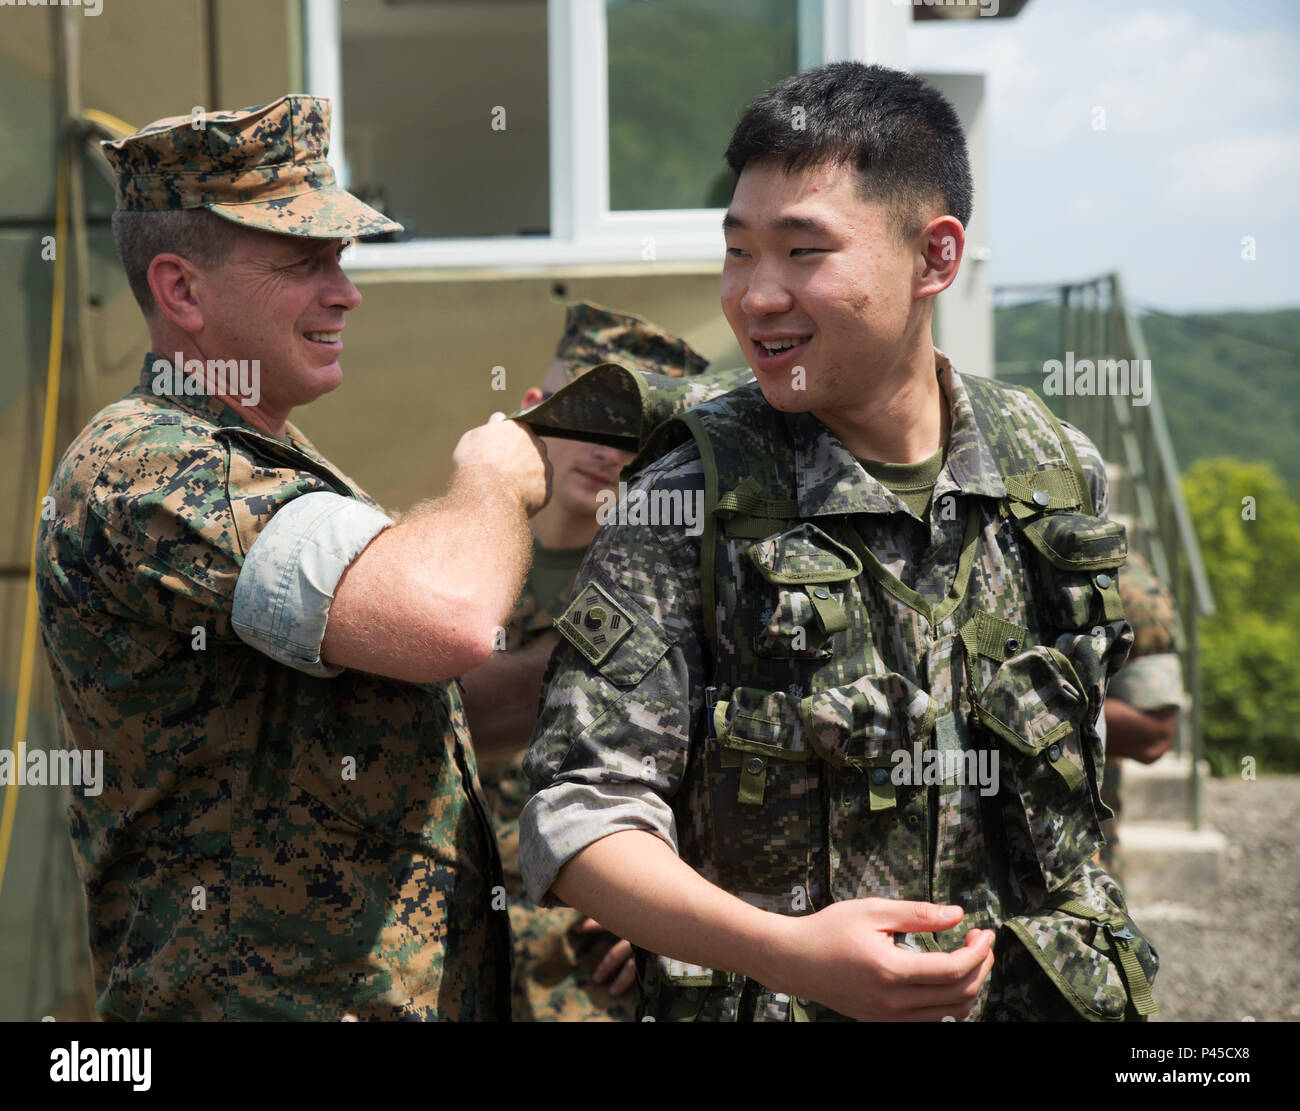 Lt. Col. Elvino M. Mendonca Jr. examines Sgt. Jang Lee’s flak jacket June 30, 2016, at Suseong Range, South Korea during a Korean Marine Exchange Program, or KMEP. The goal of the KMEP is to sustain the combined force and enhance the ROK-U.S. team at the tactical level to build combined warfighting capabilities. The U.S. Marines are with Fox Company, 2nd Battalion, 2nd Marine Regiment, currently attached to 4th Marine Regiment, III Marine Expeditionary Force through the unit deployment program The ROK Marines were a part of 73rd Battalion, 7th Regiment, 1st Marine Division. Mendonca, a Lowell, Stock Photo